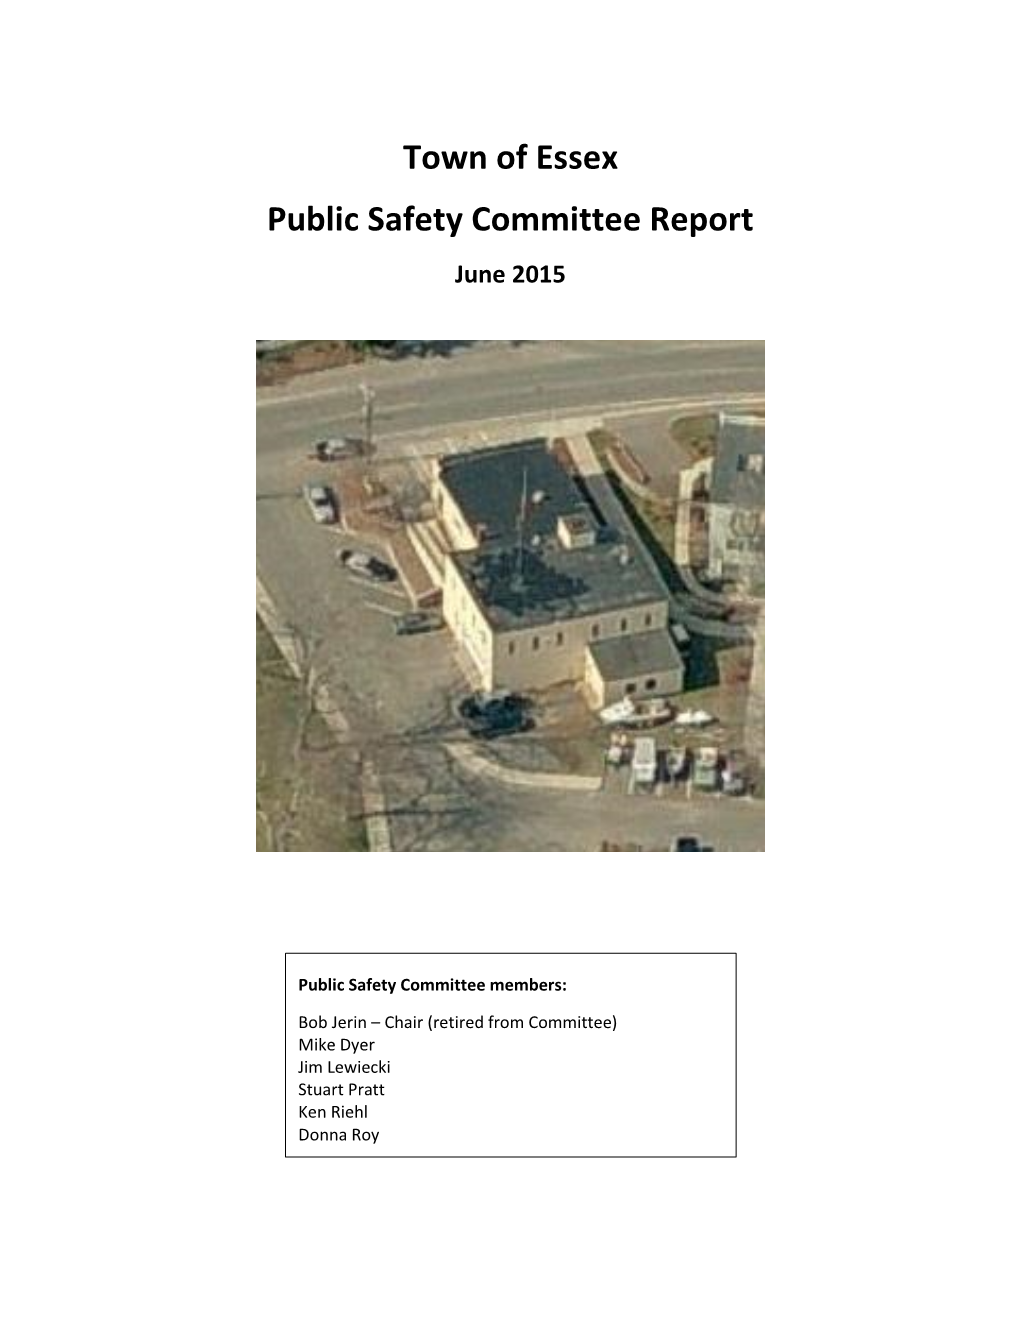 Town of Essex Public Safety Committee Report June 2015